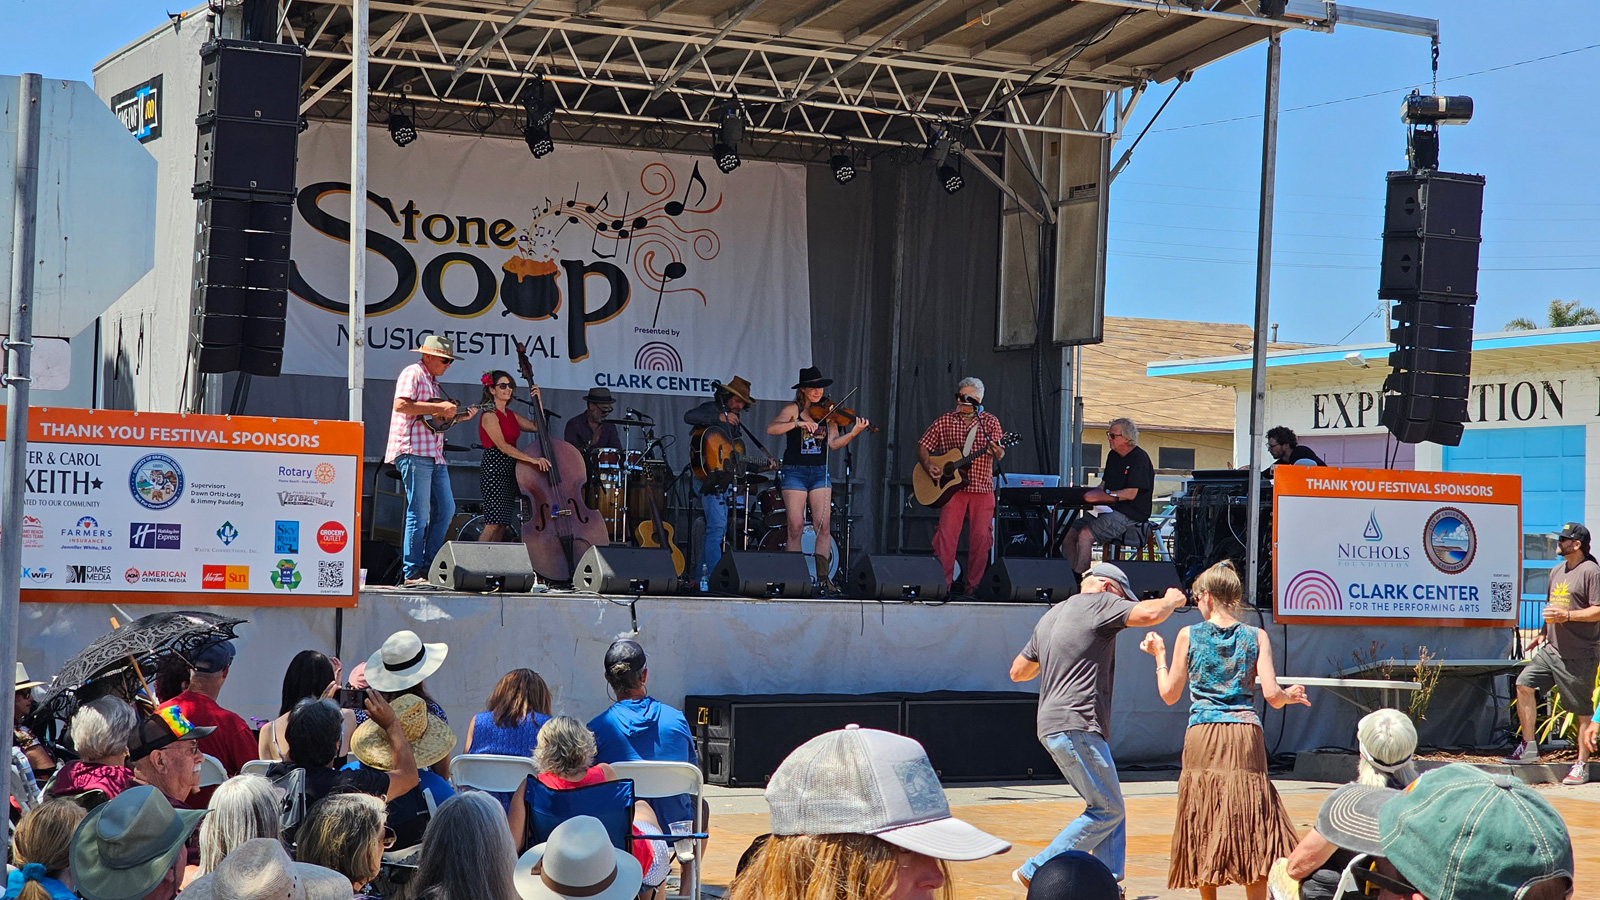 Stone Soup Street Stage with band playing and crowd dancing.